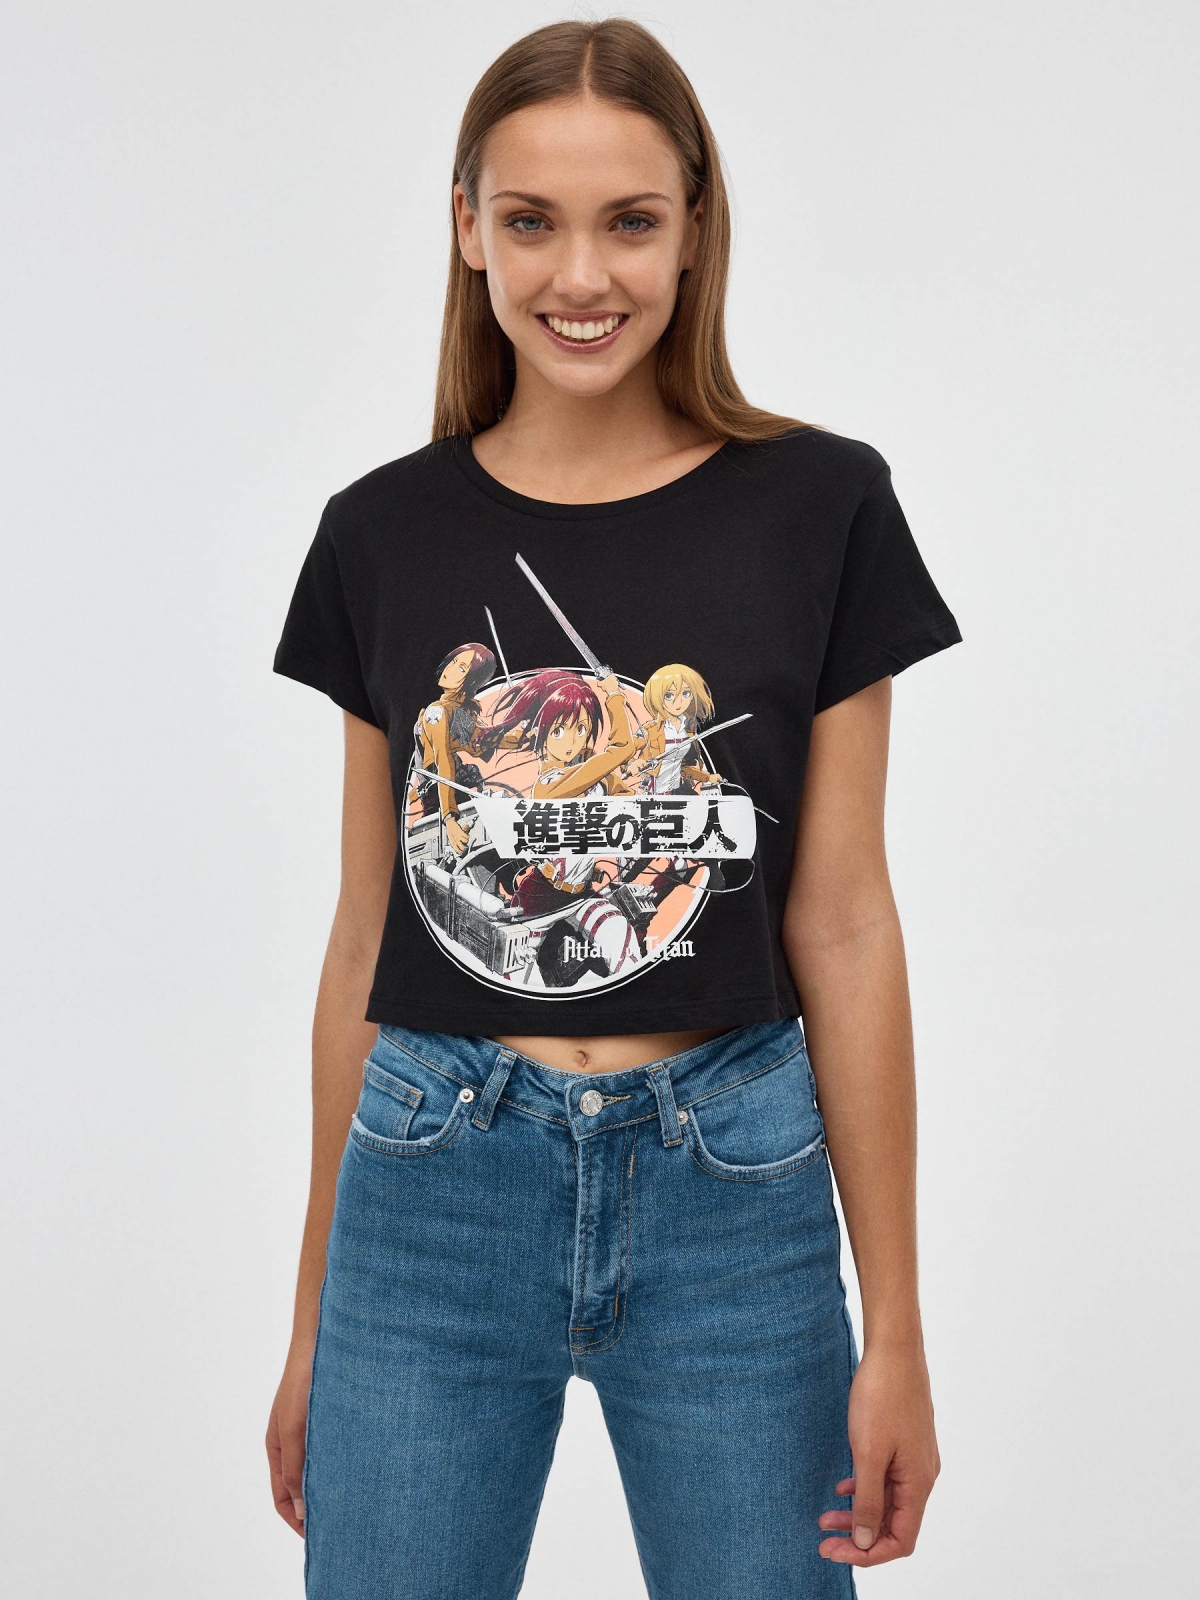 Attack on Titan t-shirt black middle front view